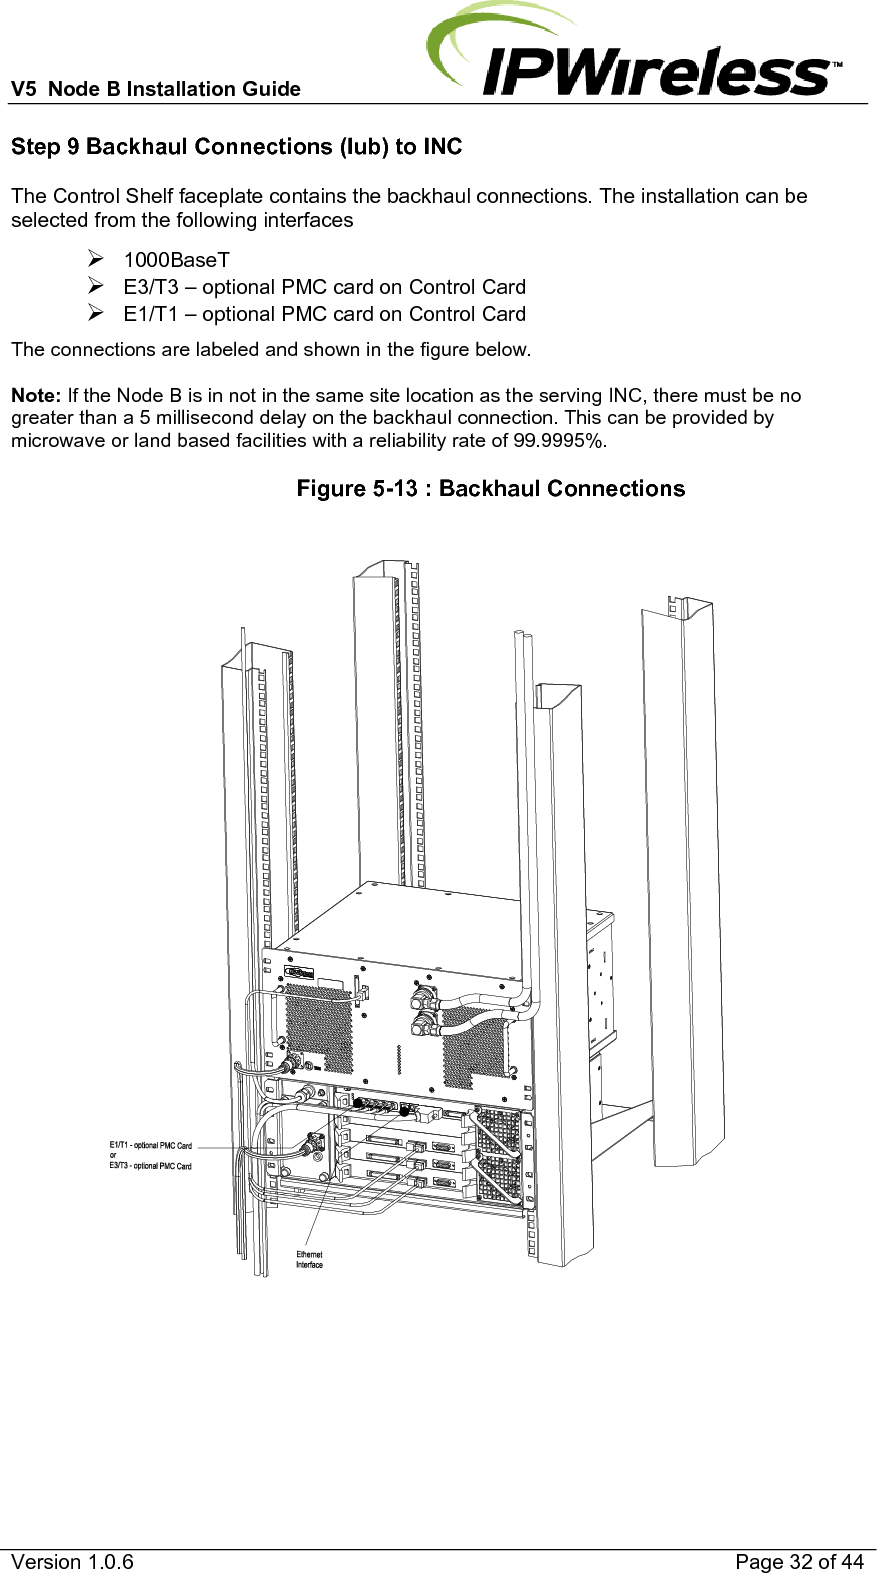 V5  Node B Installation Guide                           Version 1.0.6    Page 32 of 44 Step 9 Backhaul Connections (Iub) to INC The Control Shelf faceplate contains the backhaul connections. The installation can be selected from the following interfaces ¾ 1000BaseT  ¾ E3/T3 – optional PMC card on Control Card ¾ E1/T1 – optional PMC card on Control Card The connections are labeled and shown in the figure below.   Note: If the Node B is in not in the same site location as the serving INC, there must be no greater than a 5 millisecond delay on the backhaul connection. This can be provided by microwave or land based facilities with a reliability rate of 99.9995%.                   Figure 5-13 : Backhaul Connections     